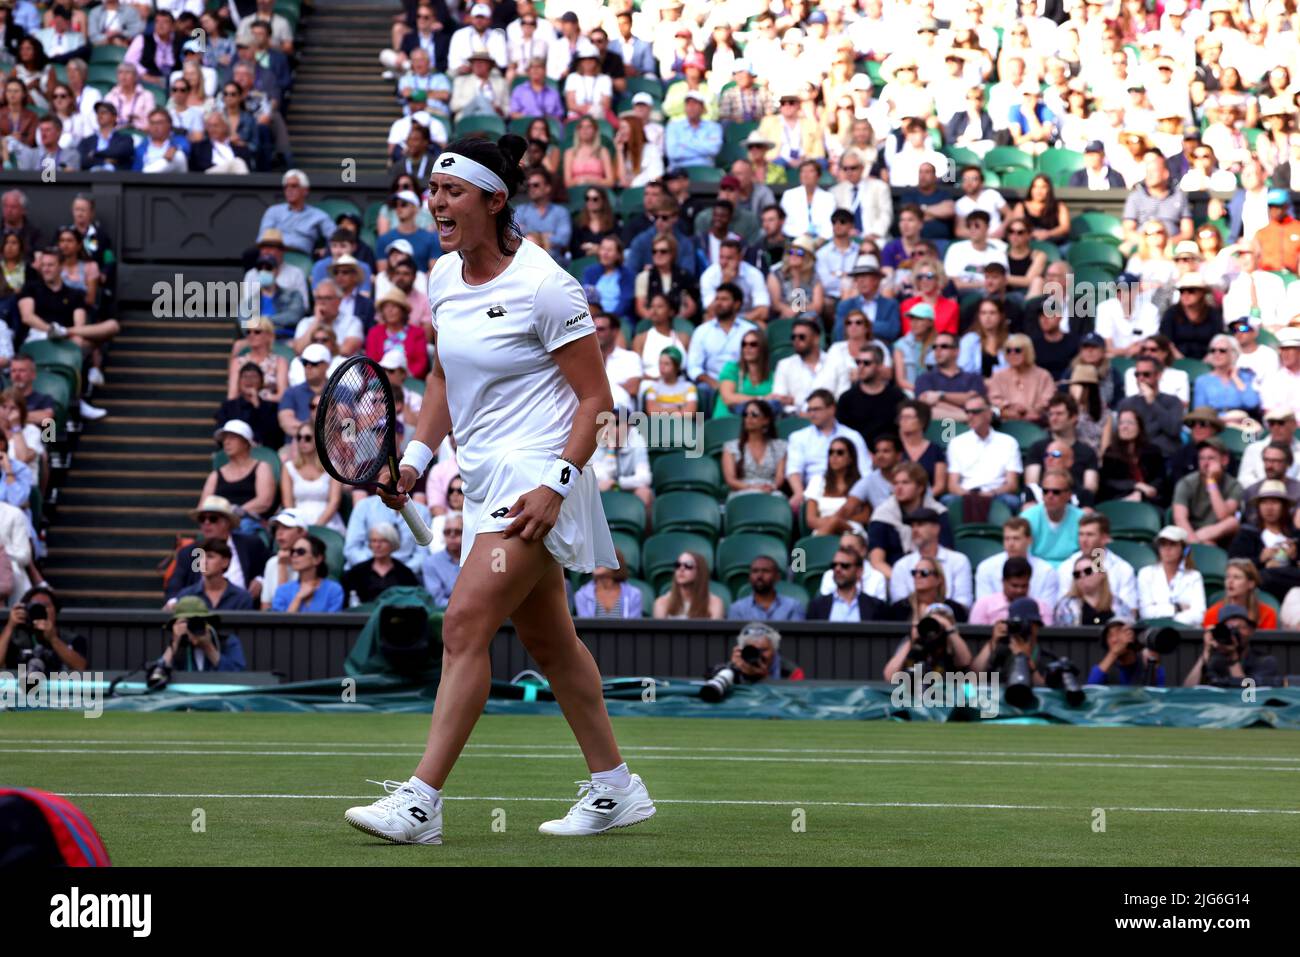 5 July 2022, All England Lawn Tennis Club, Wimbledon, London, United Kingdom:  Tunisia's Ons Jabeur celebrates a point against Marie Bouzkova of the Czech Republic during their quarterfinal match at Wimbledon today.  Jabeur won the match to advance to the semi finals. Stock Photo